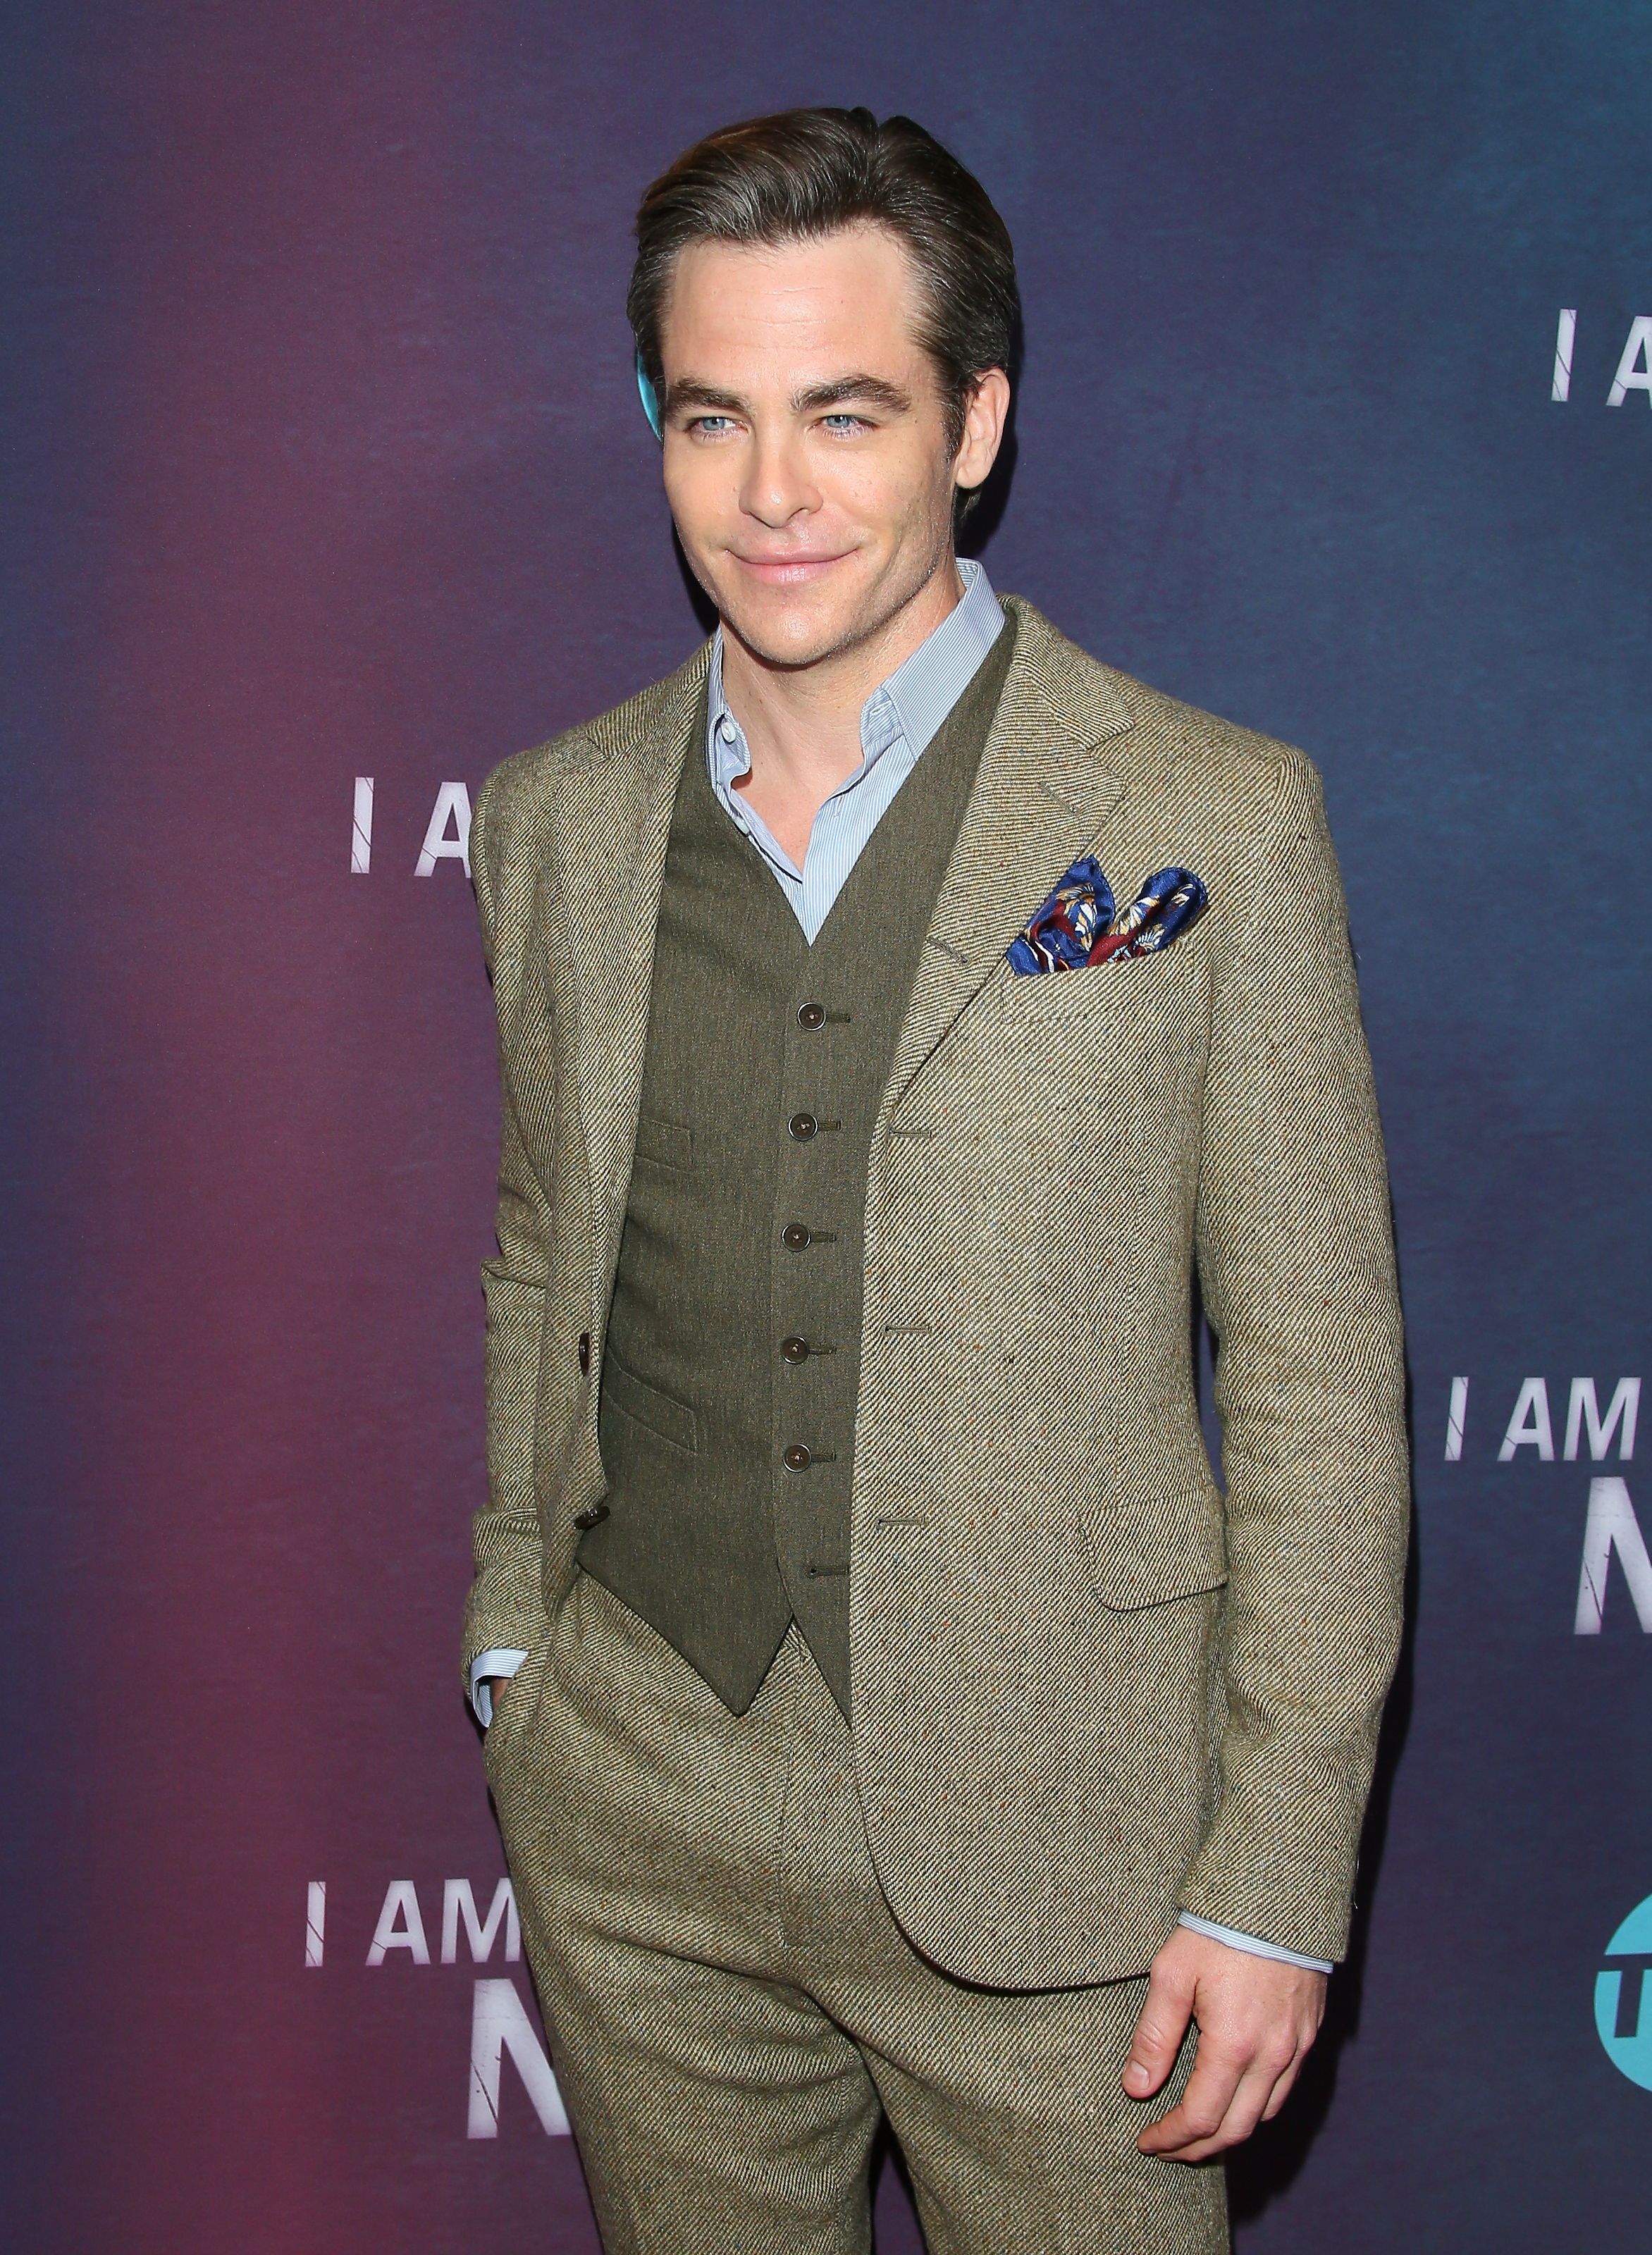 Chris Pine at the premiere of TNT's "I Am the Night" on January 24, 2019, in Los Angeles, California. | Source: Getty Images